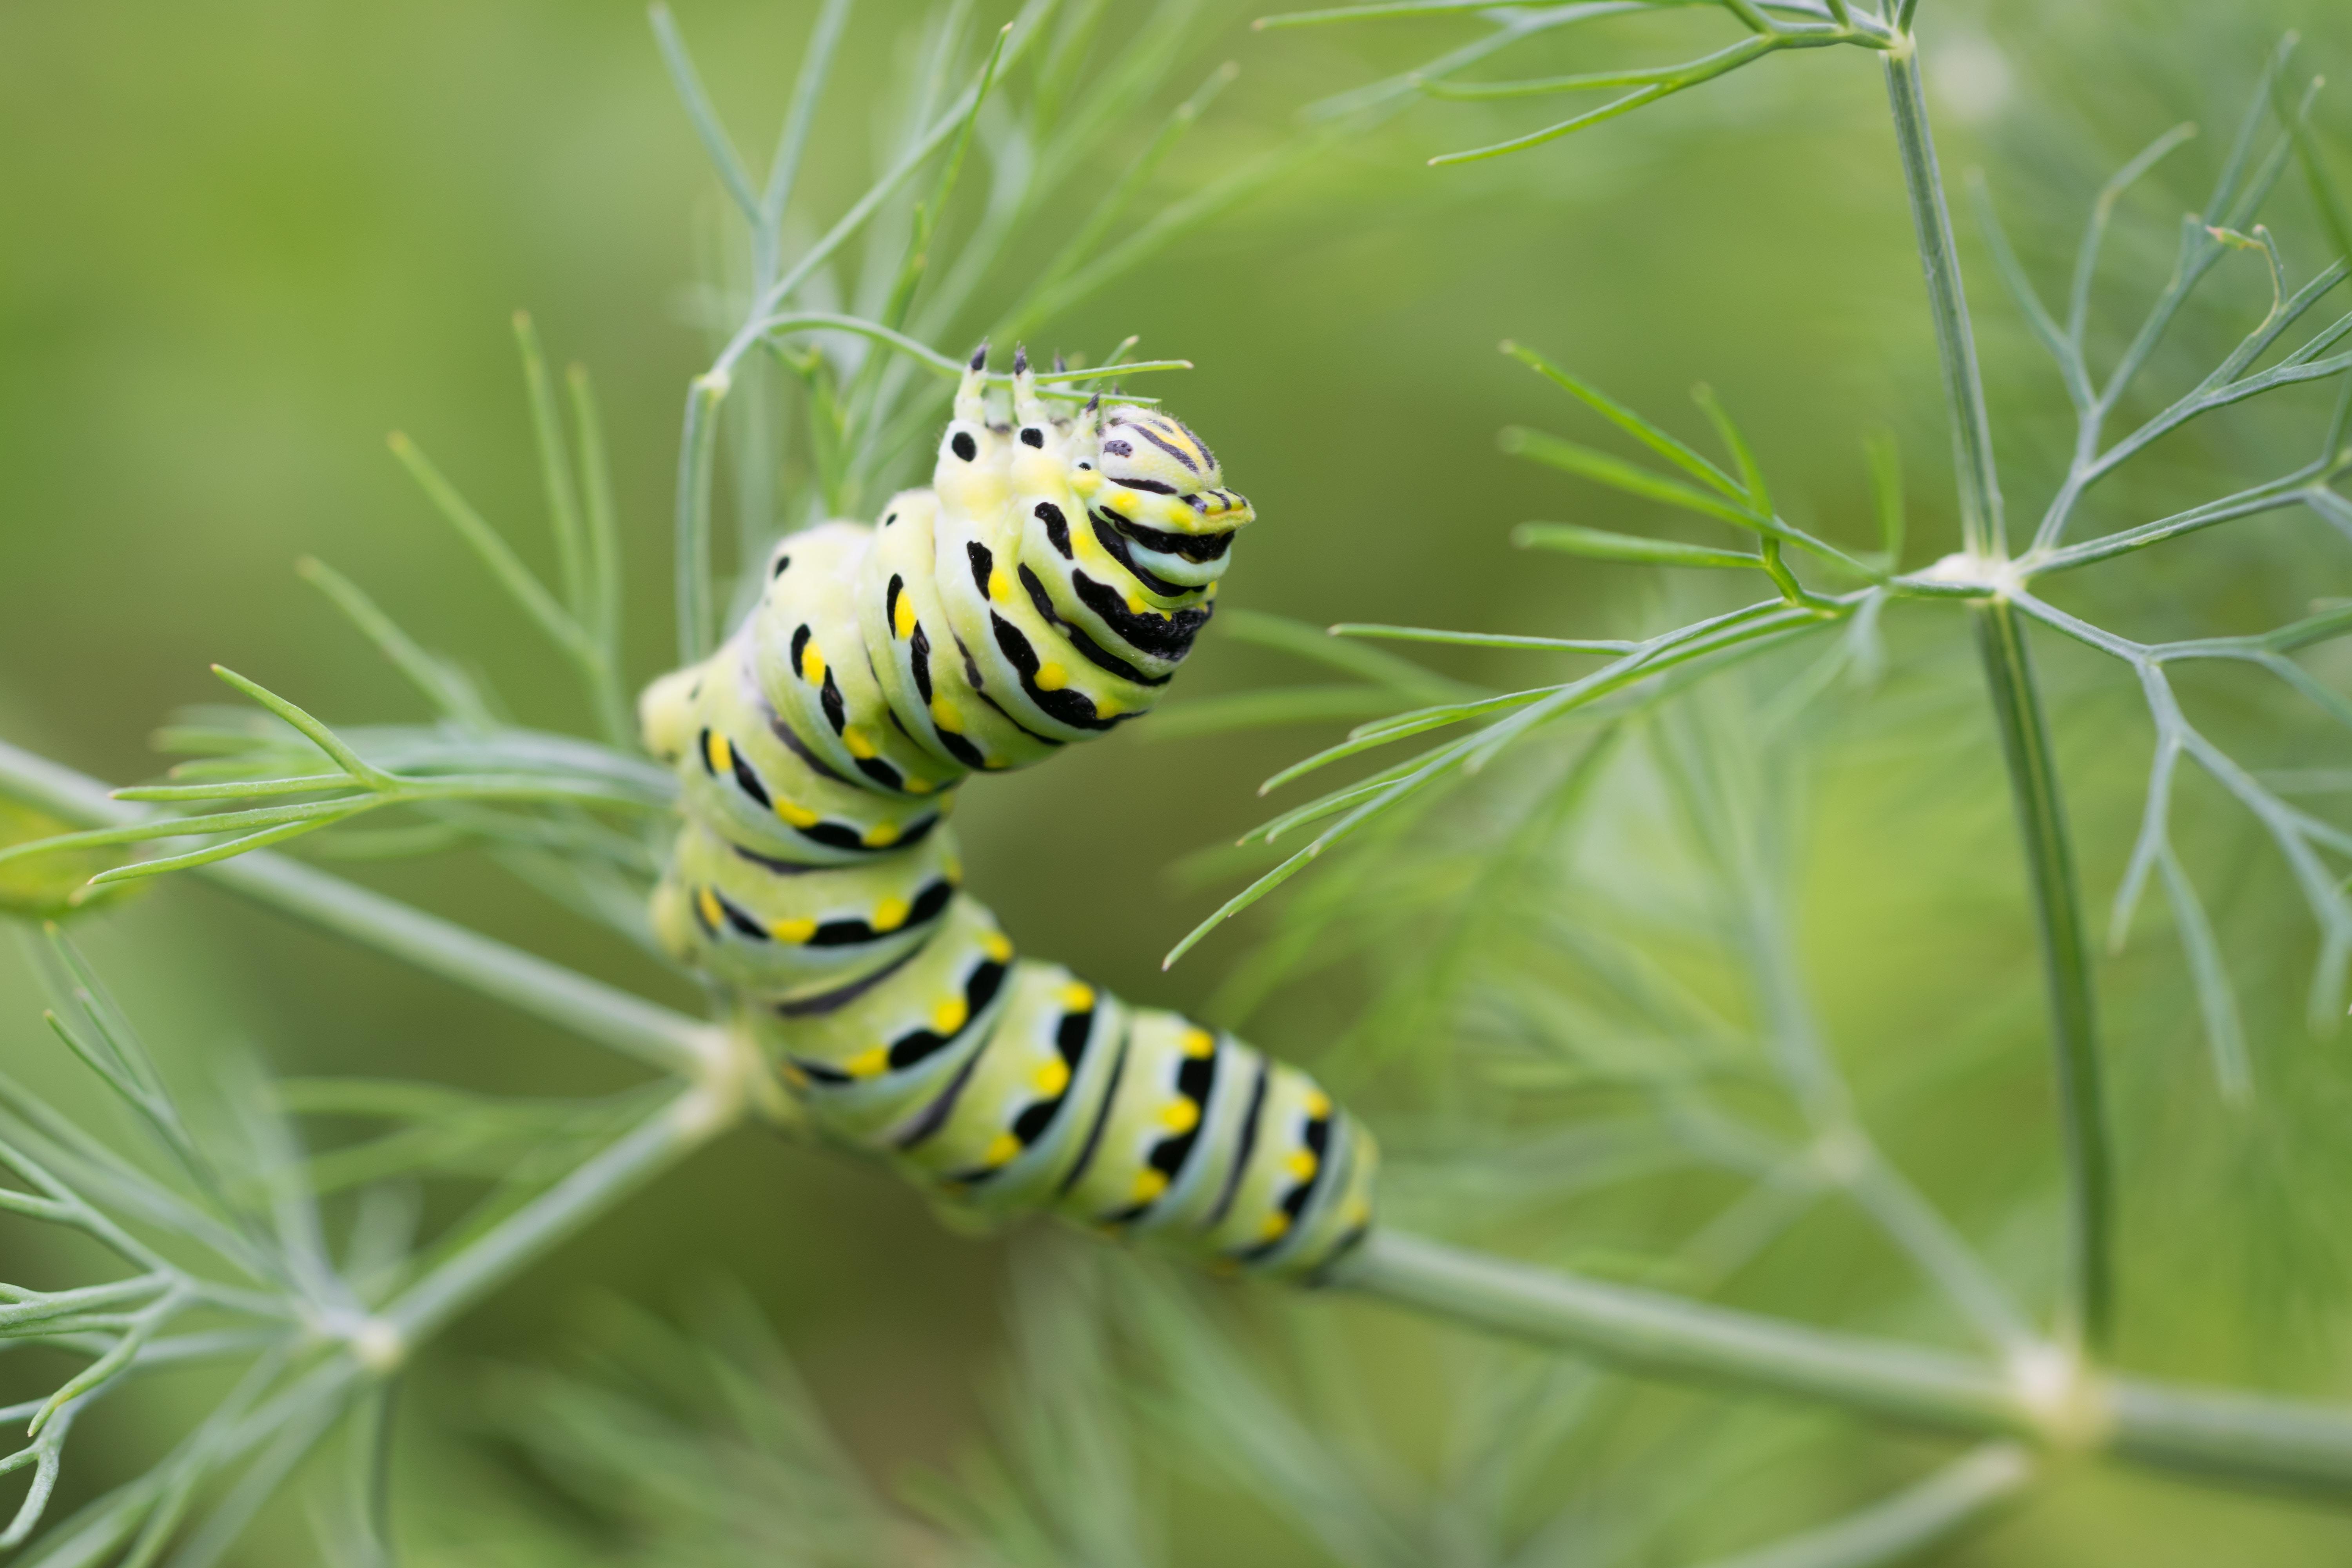 Caterpillar Picture. Download Free Image